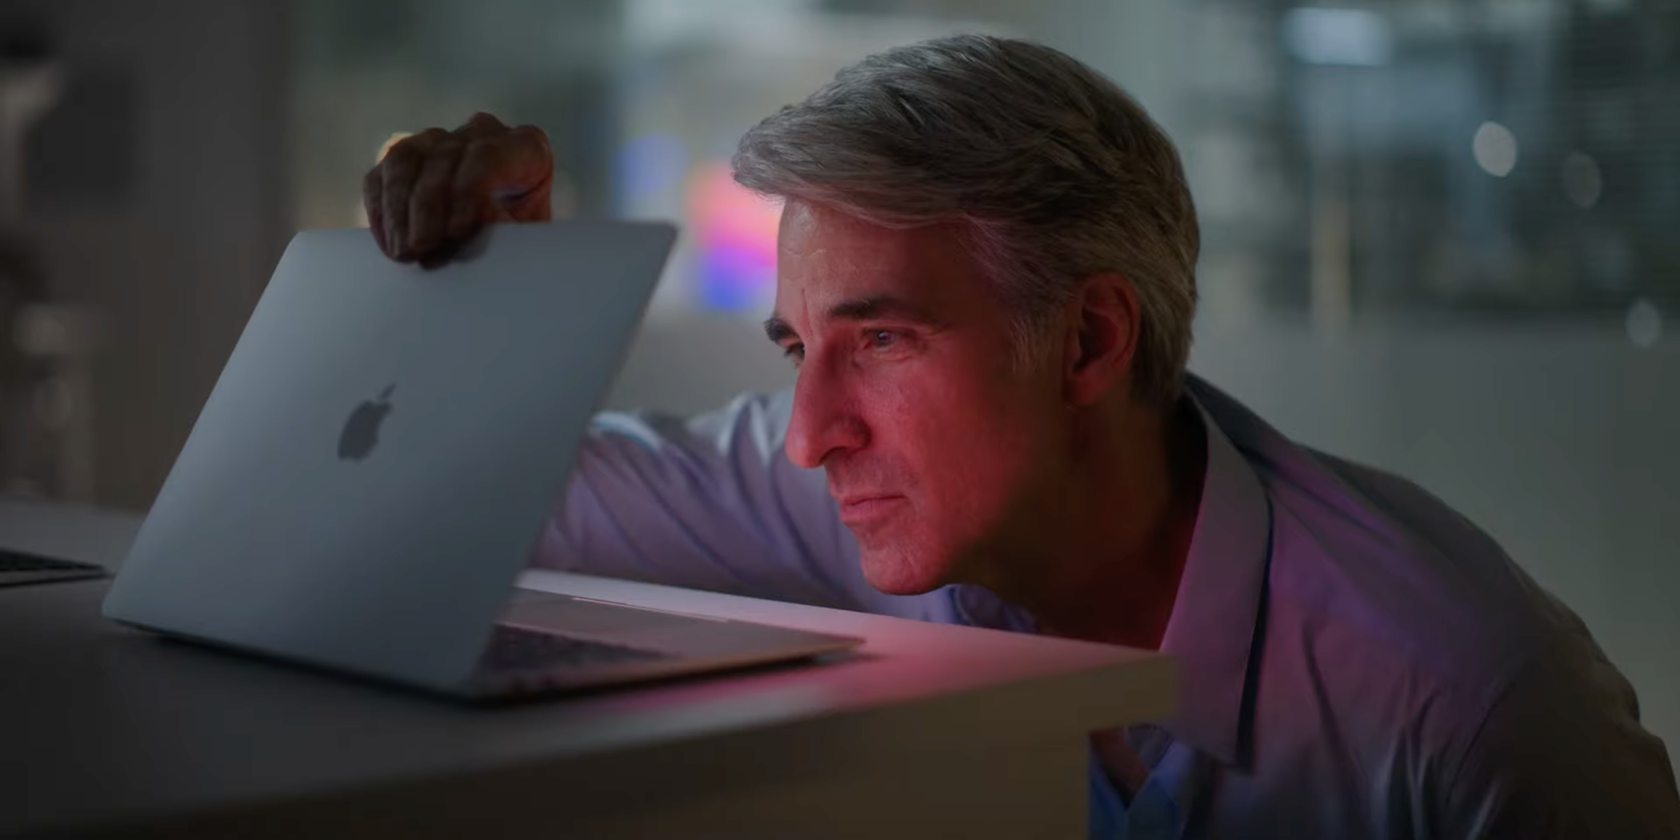 A still from the Apple October 2020 event video showing Craig Federighi, Senior Vice President of Software Engineering, opening the lid of an M1 MacBook Air notebook